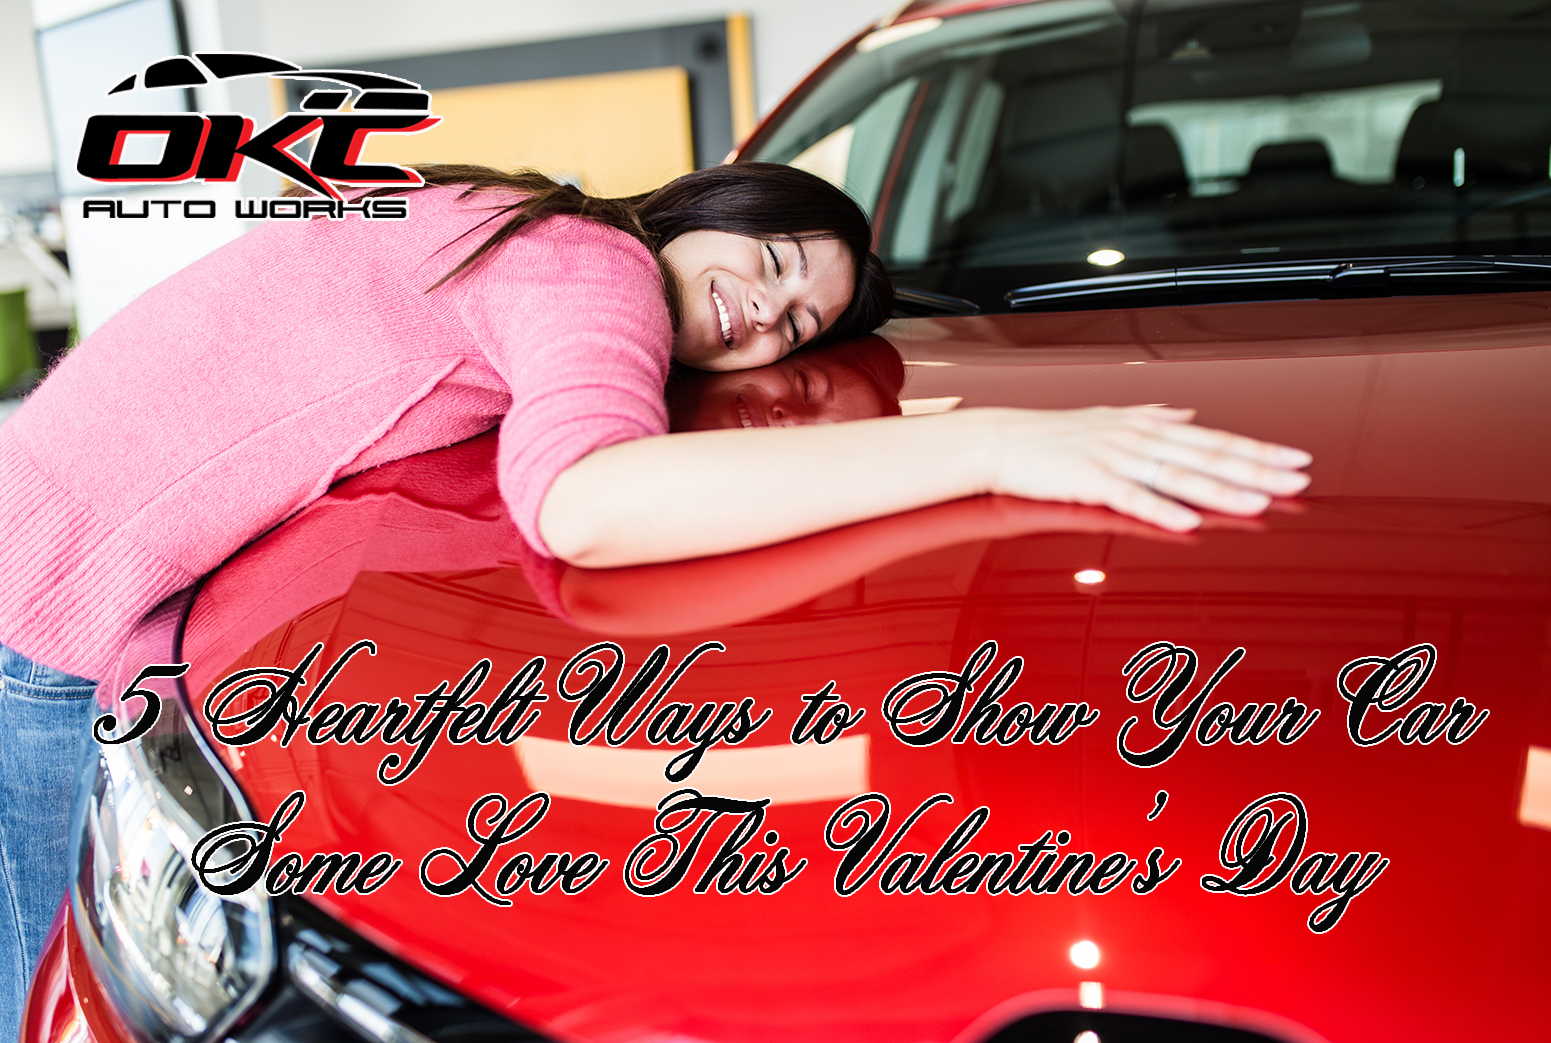 Valentine's Day Car Care: 5 Ways to Show Your Vehicle Love